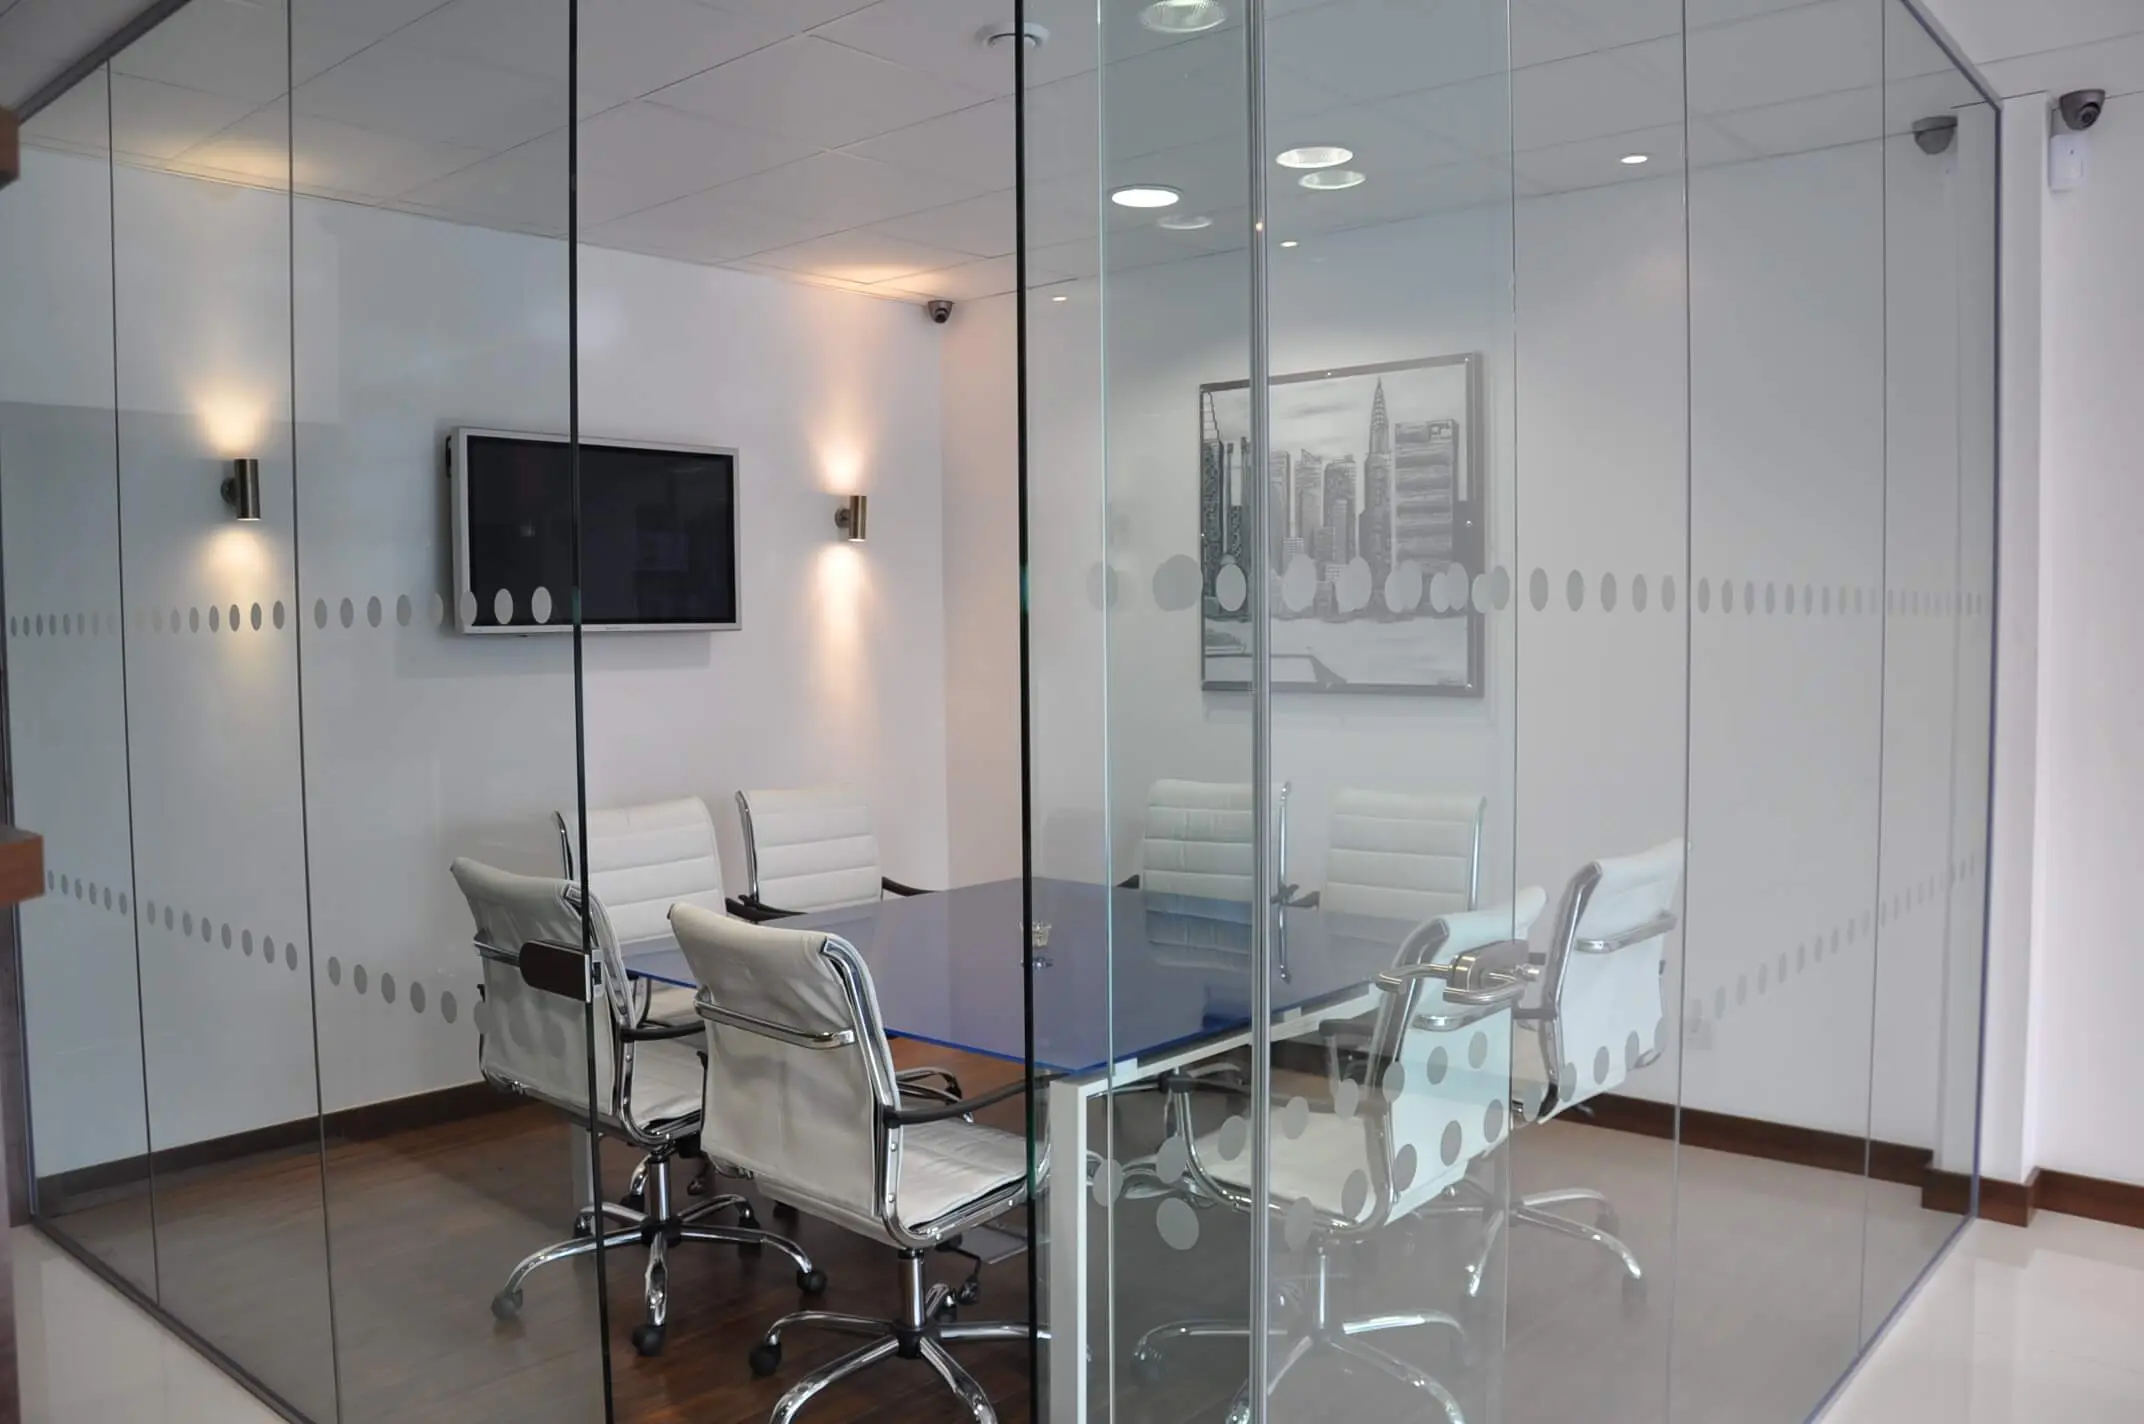 Meeting space with table and chairs around it in dotted glass office partitions